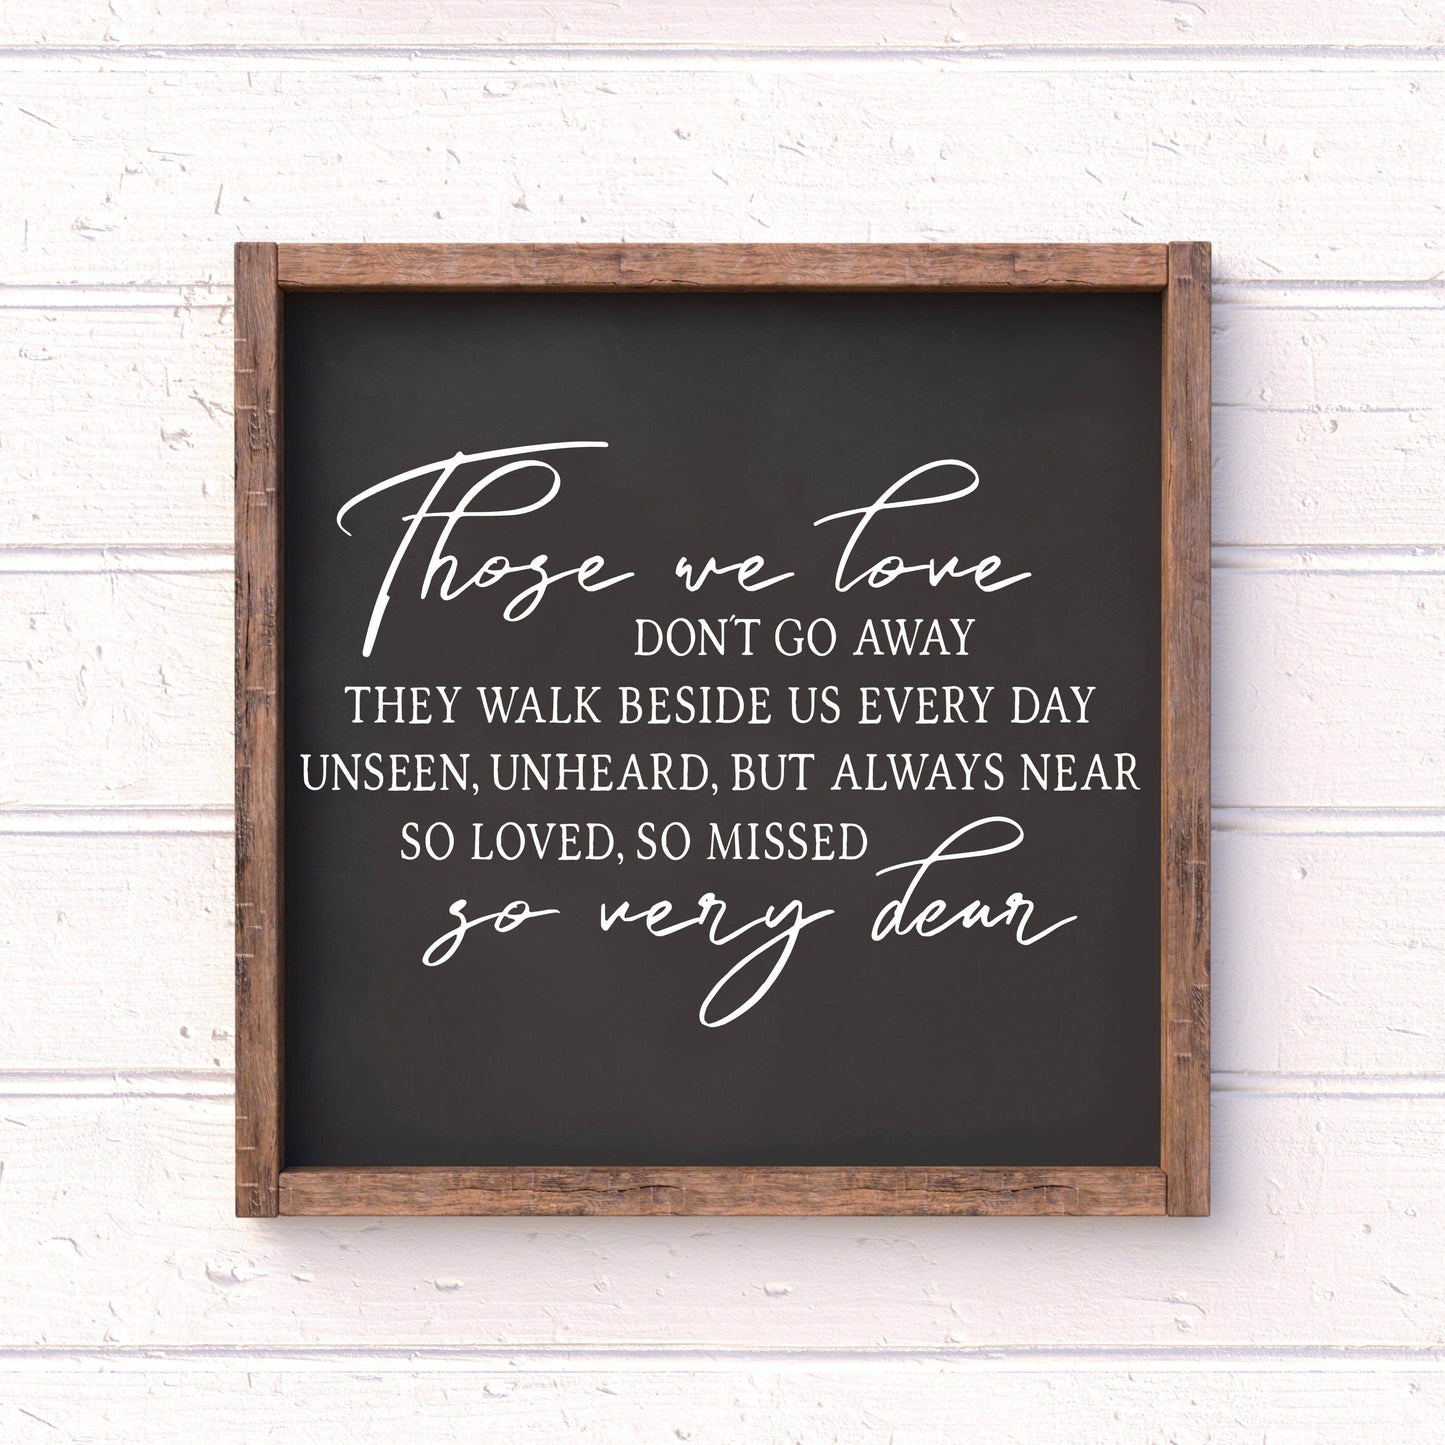 Those we love don't go away framed wood sign, love sign, couples gift sign, quote sign, home decor